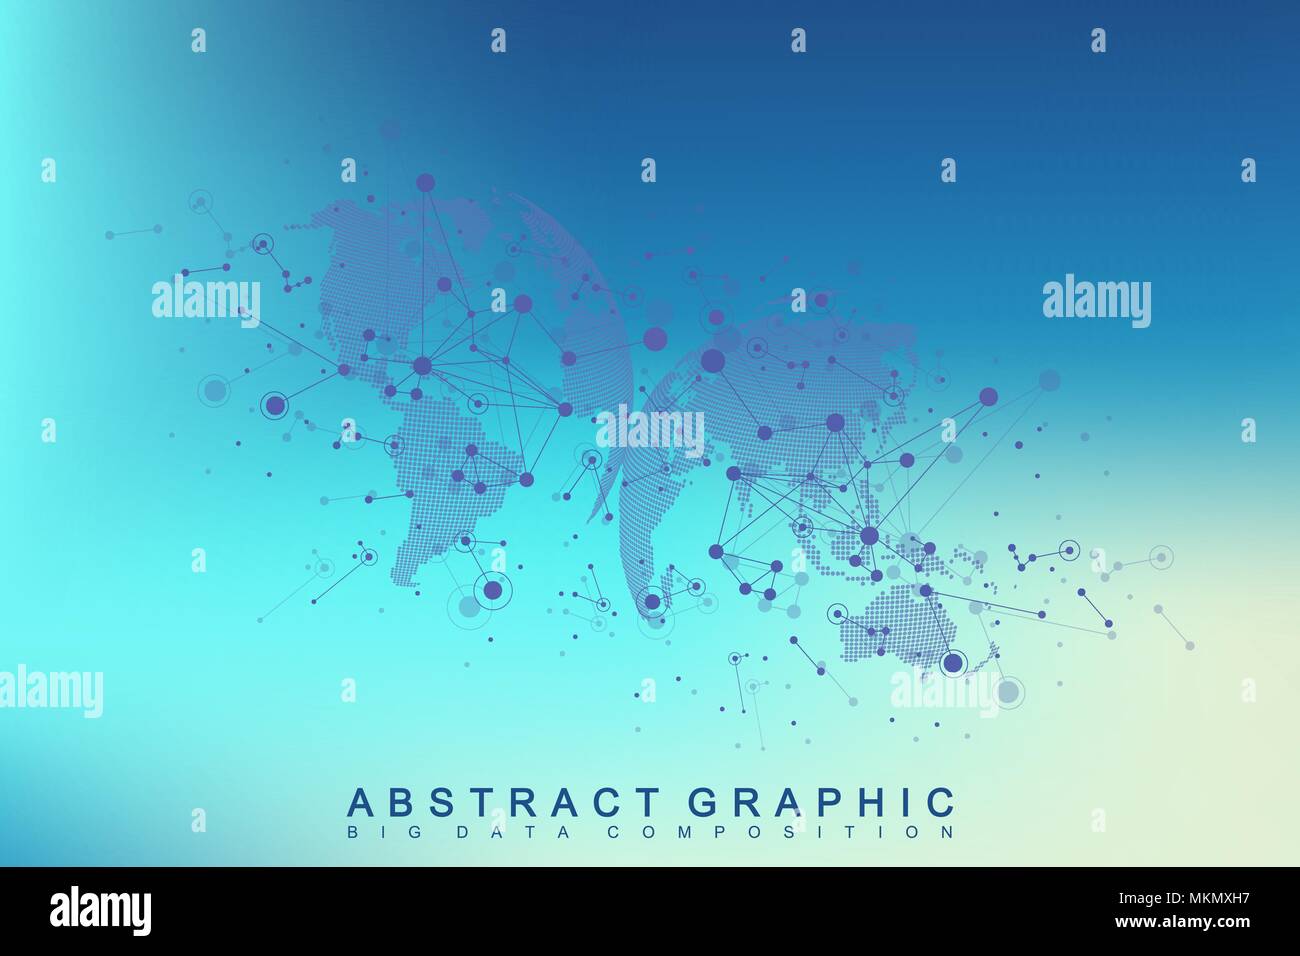 Three-dimensional abstract planet, representing the global, international meaning technology networking concept. Digital data visualization. Big Data background communication vector illustration. Stock Vector